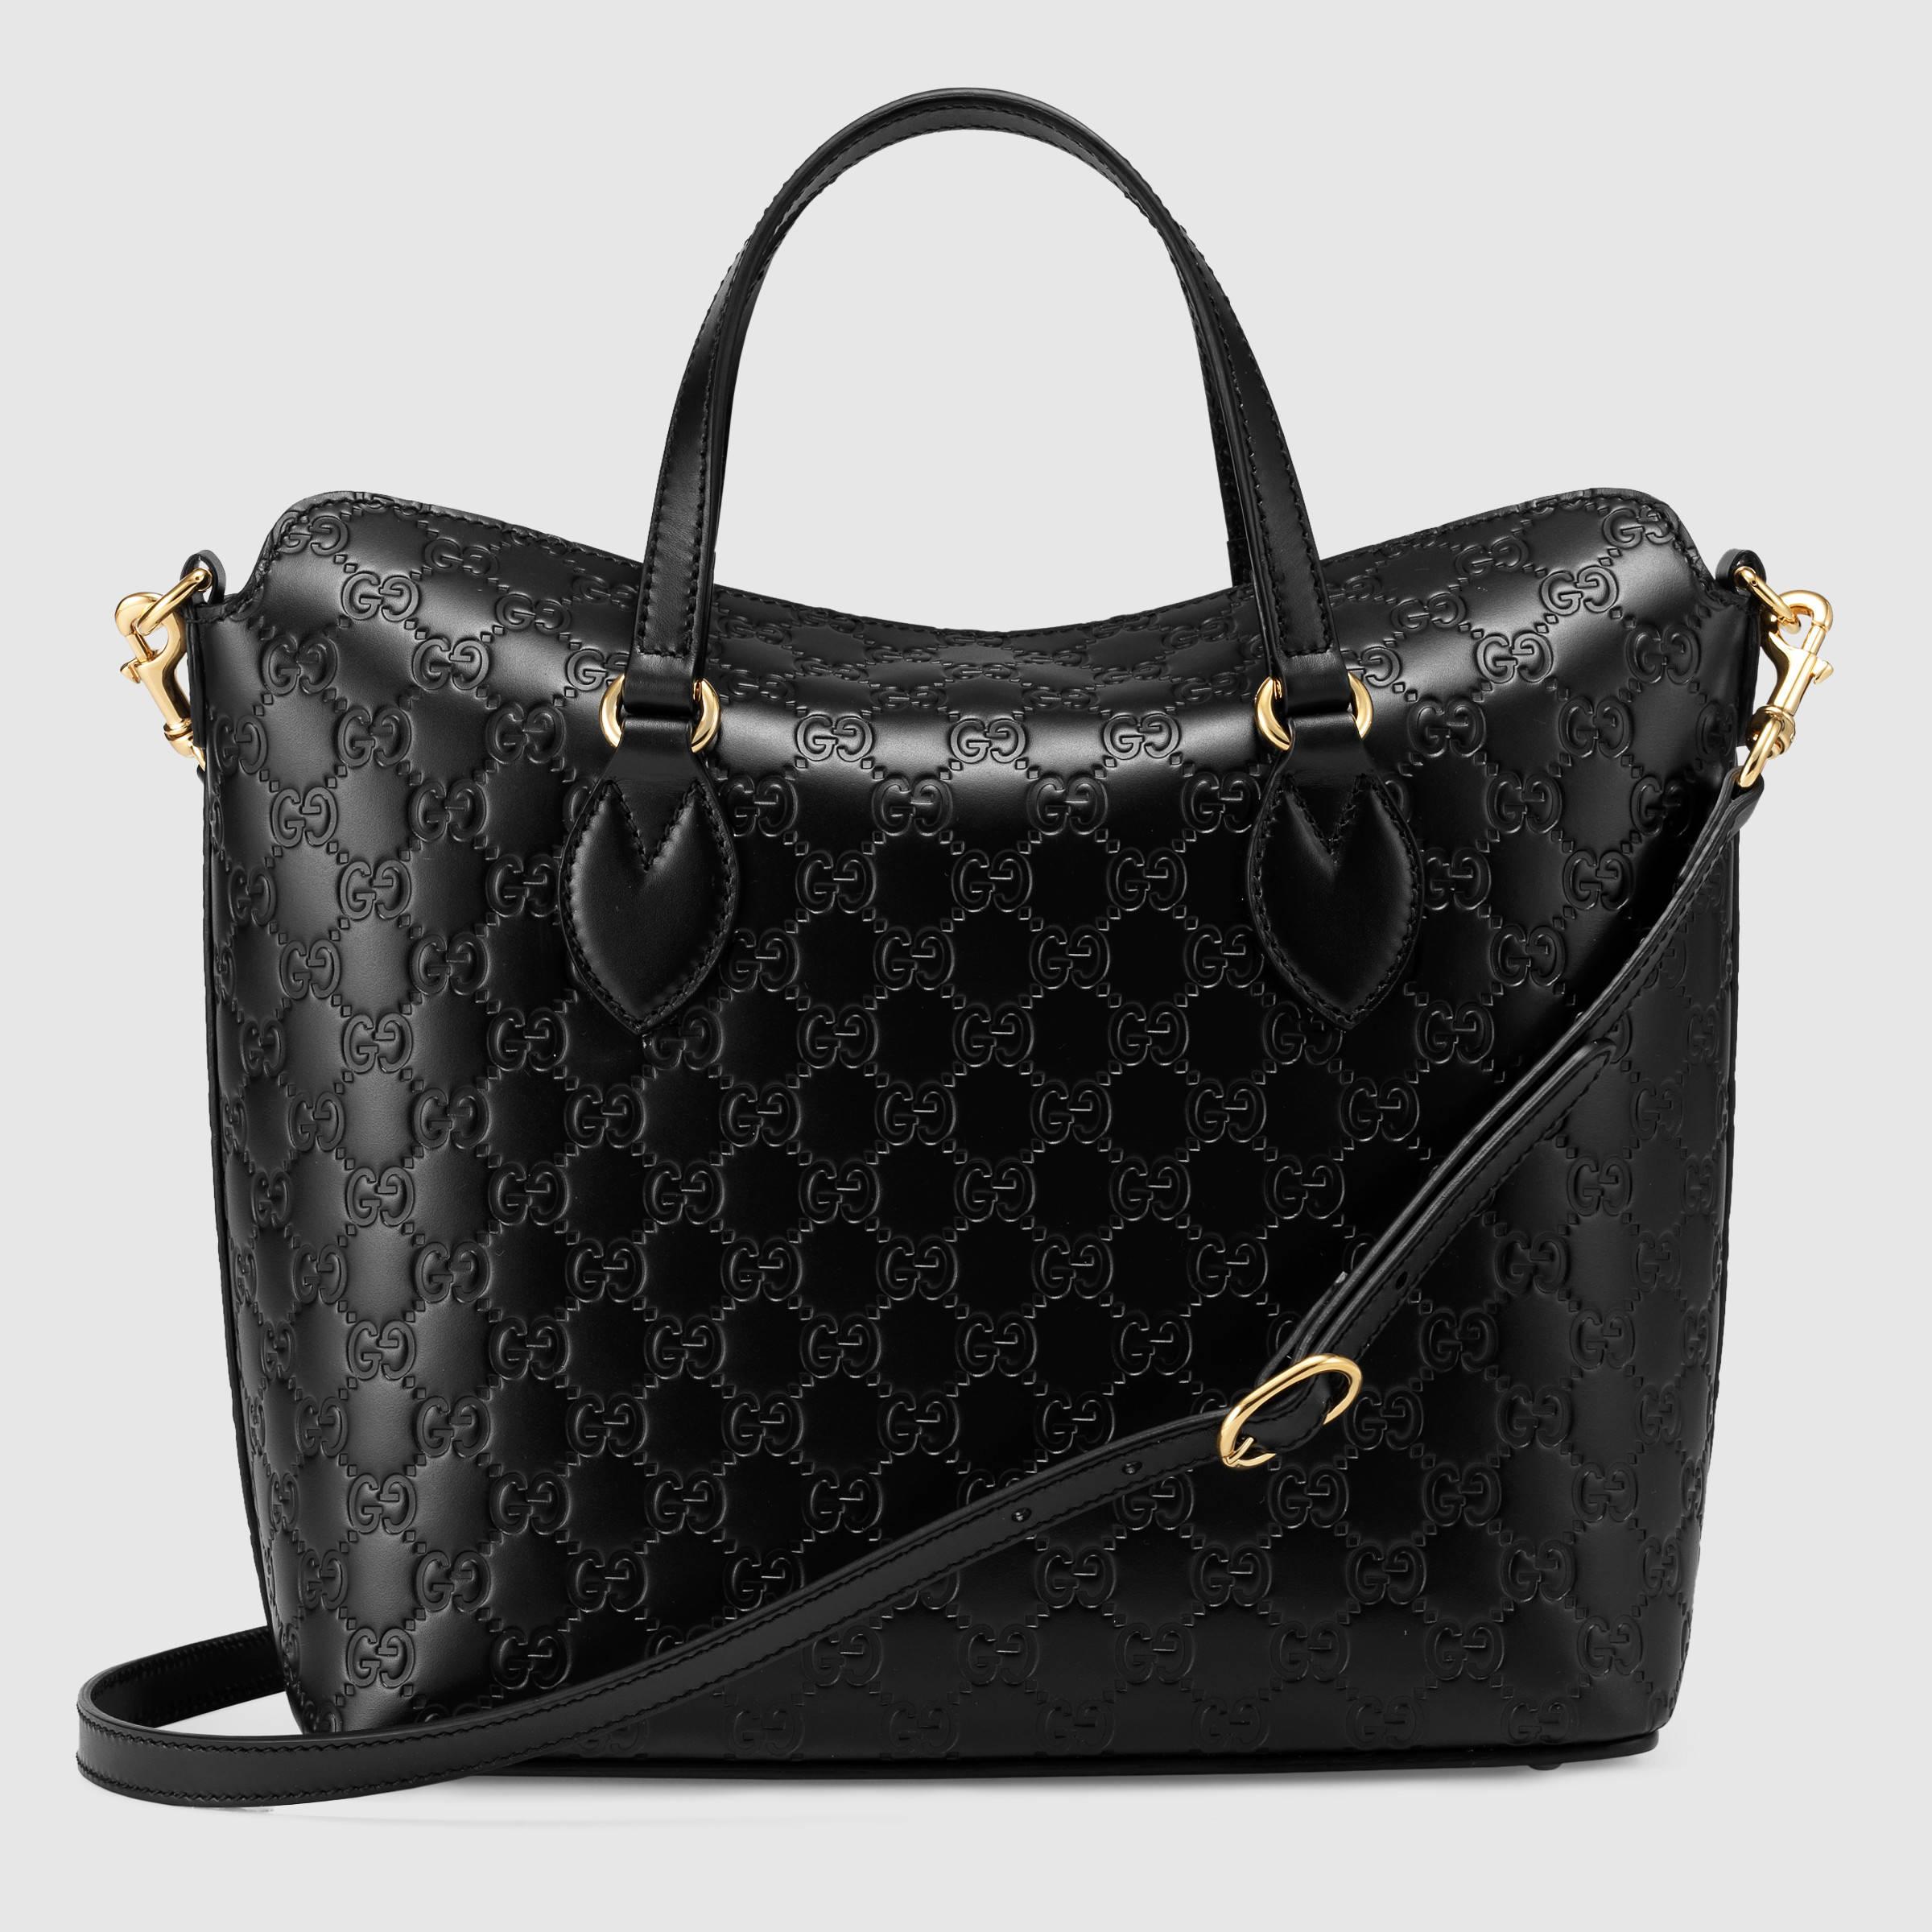 Lyst - Gucci Signature Leather Tote Bag in Black